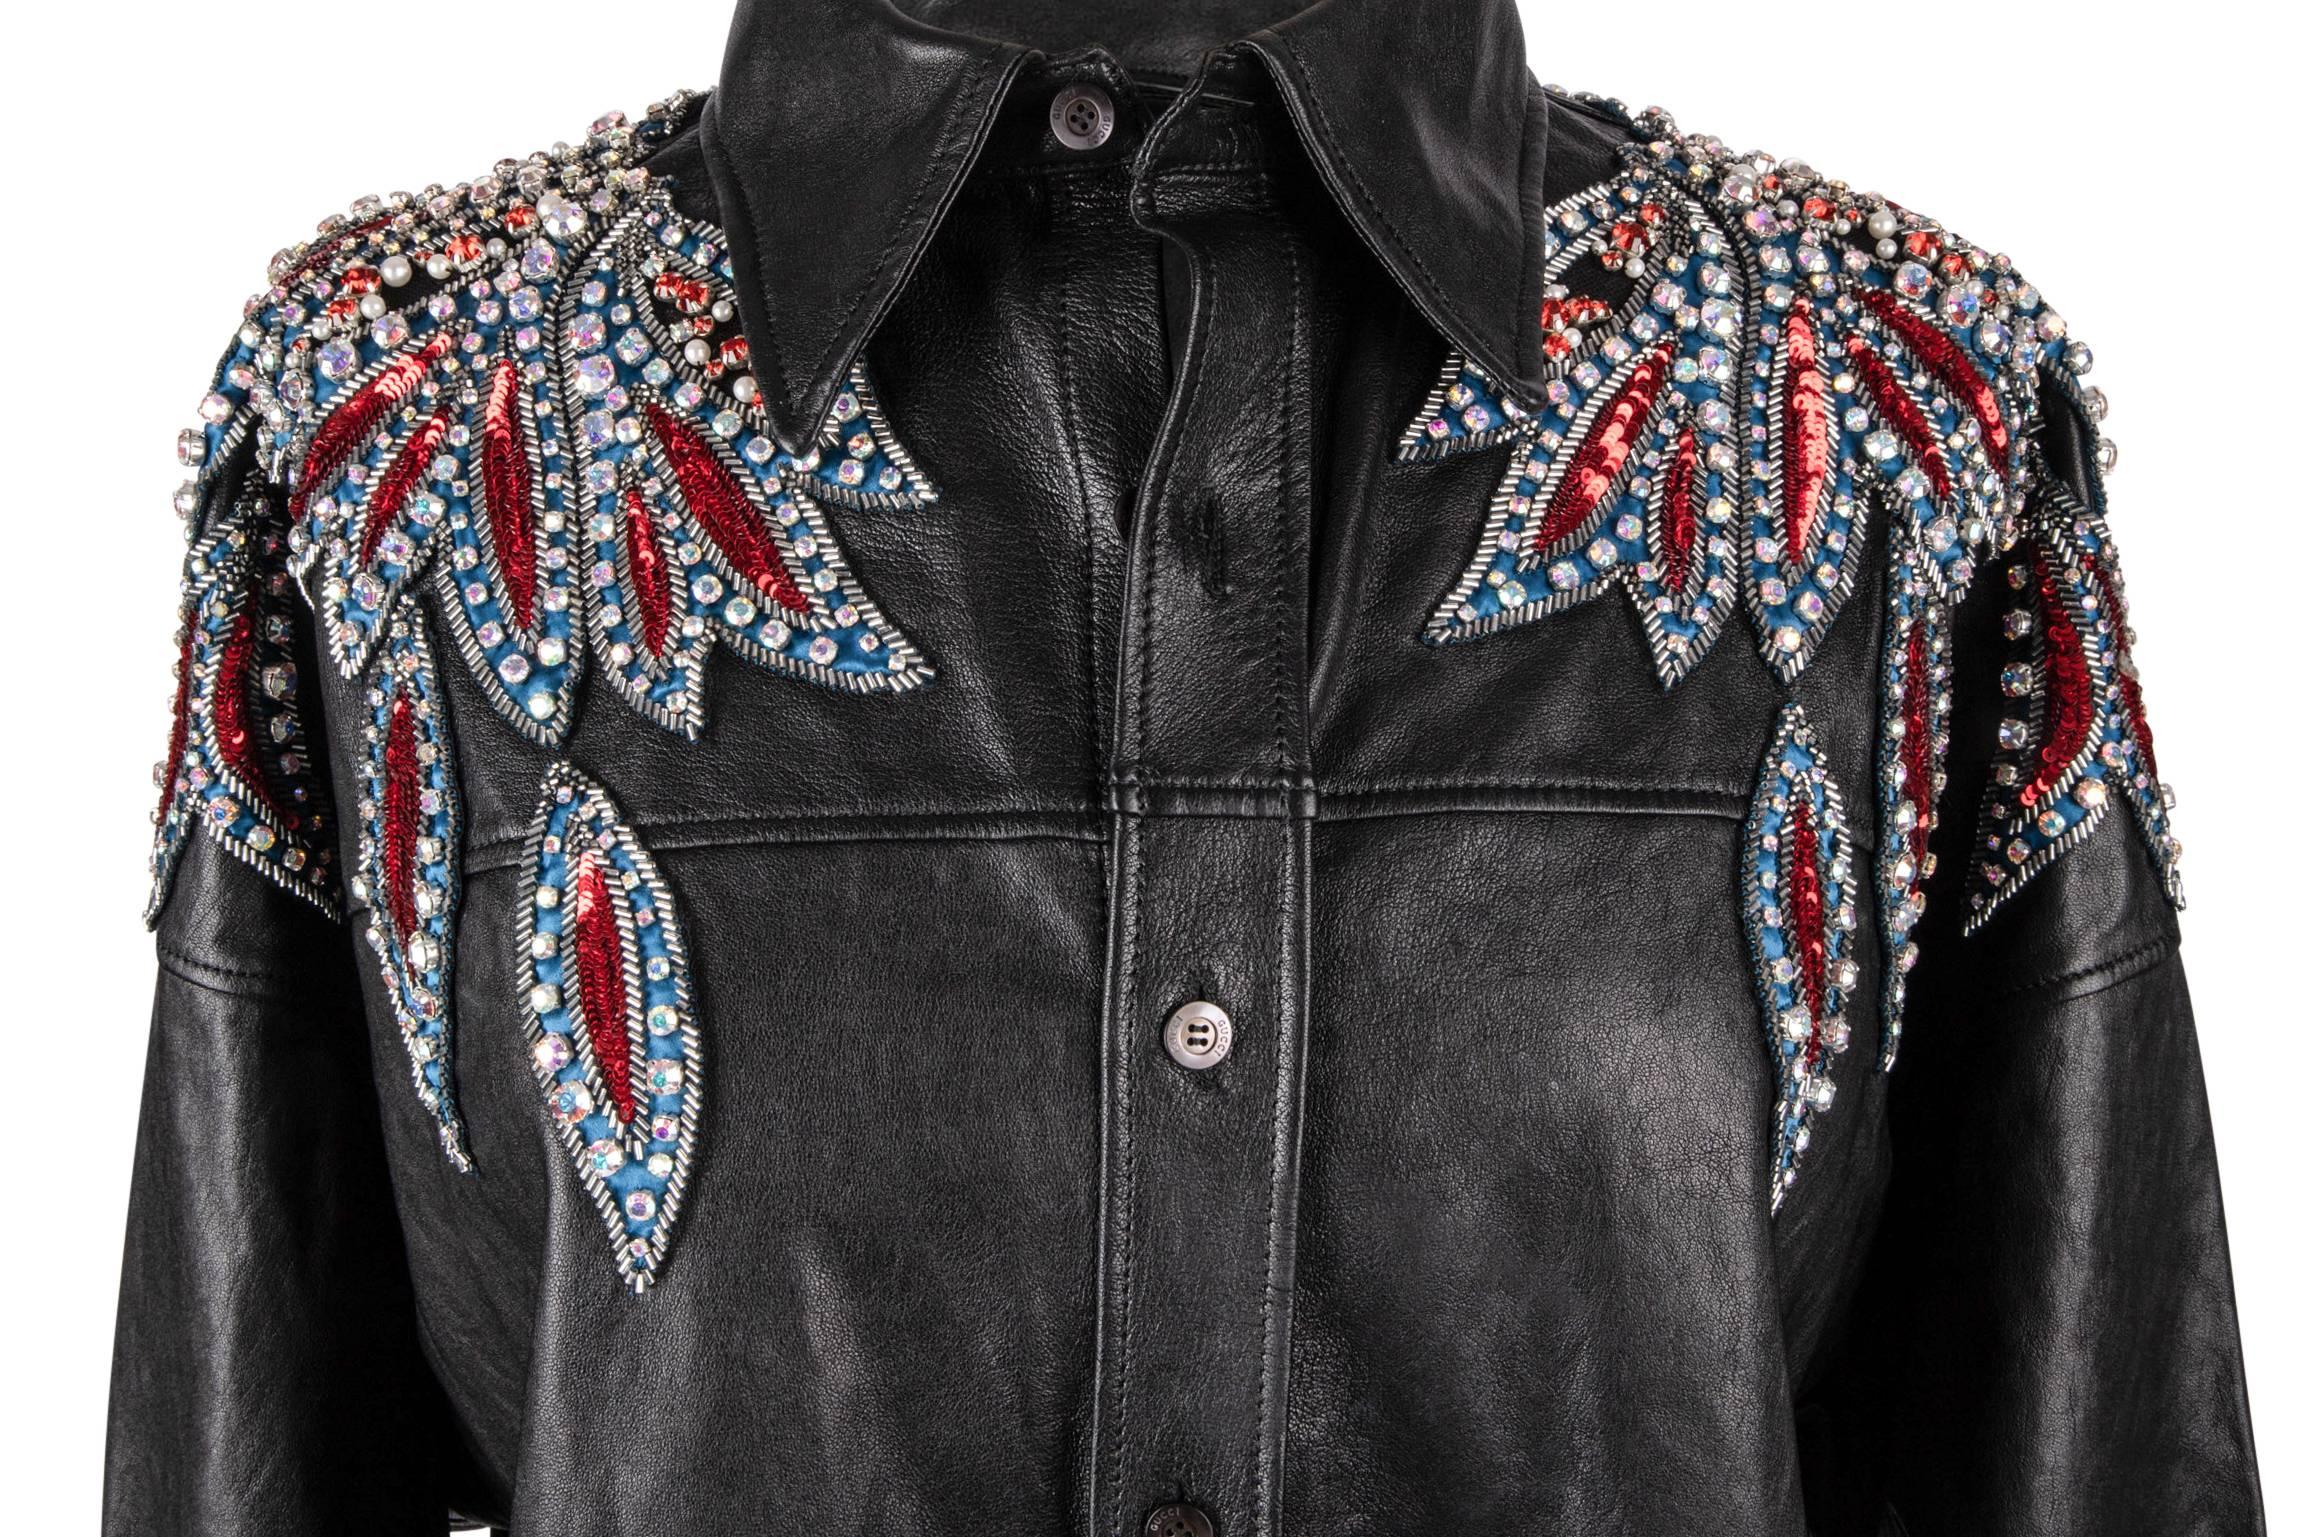 Guaranteed authentic Gucci S/S 2018 leather shirt with sensational sequin and crystal work in western influence around the shoulders. 
Red, blue and white set on distressed leather button front.
Button cuffs.
Soft kid leather. 
NEW or NEVER